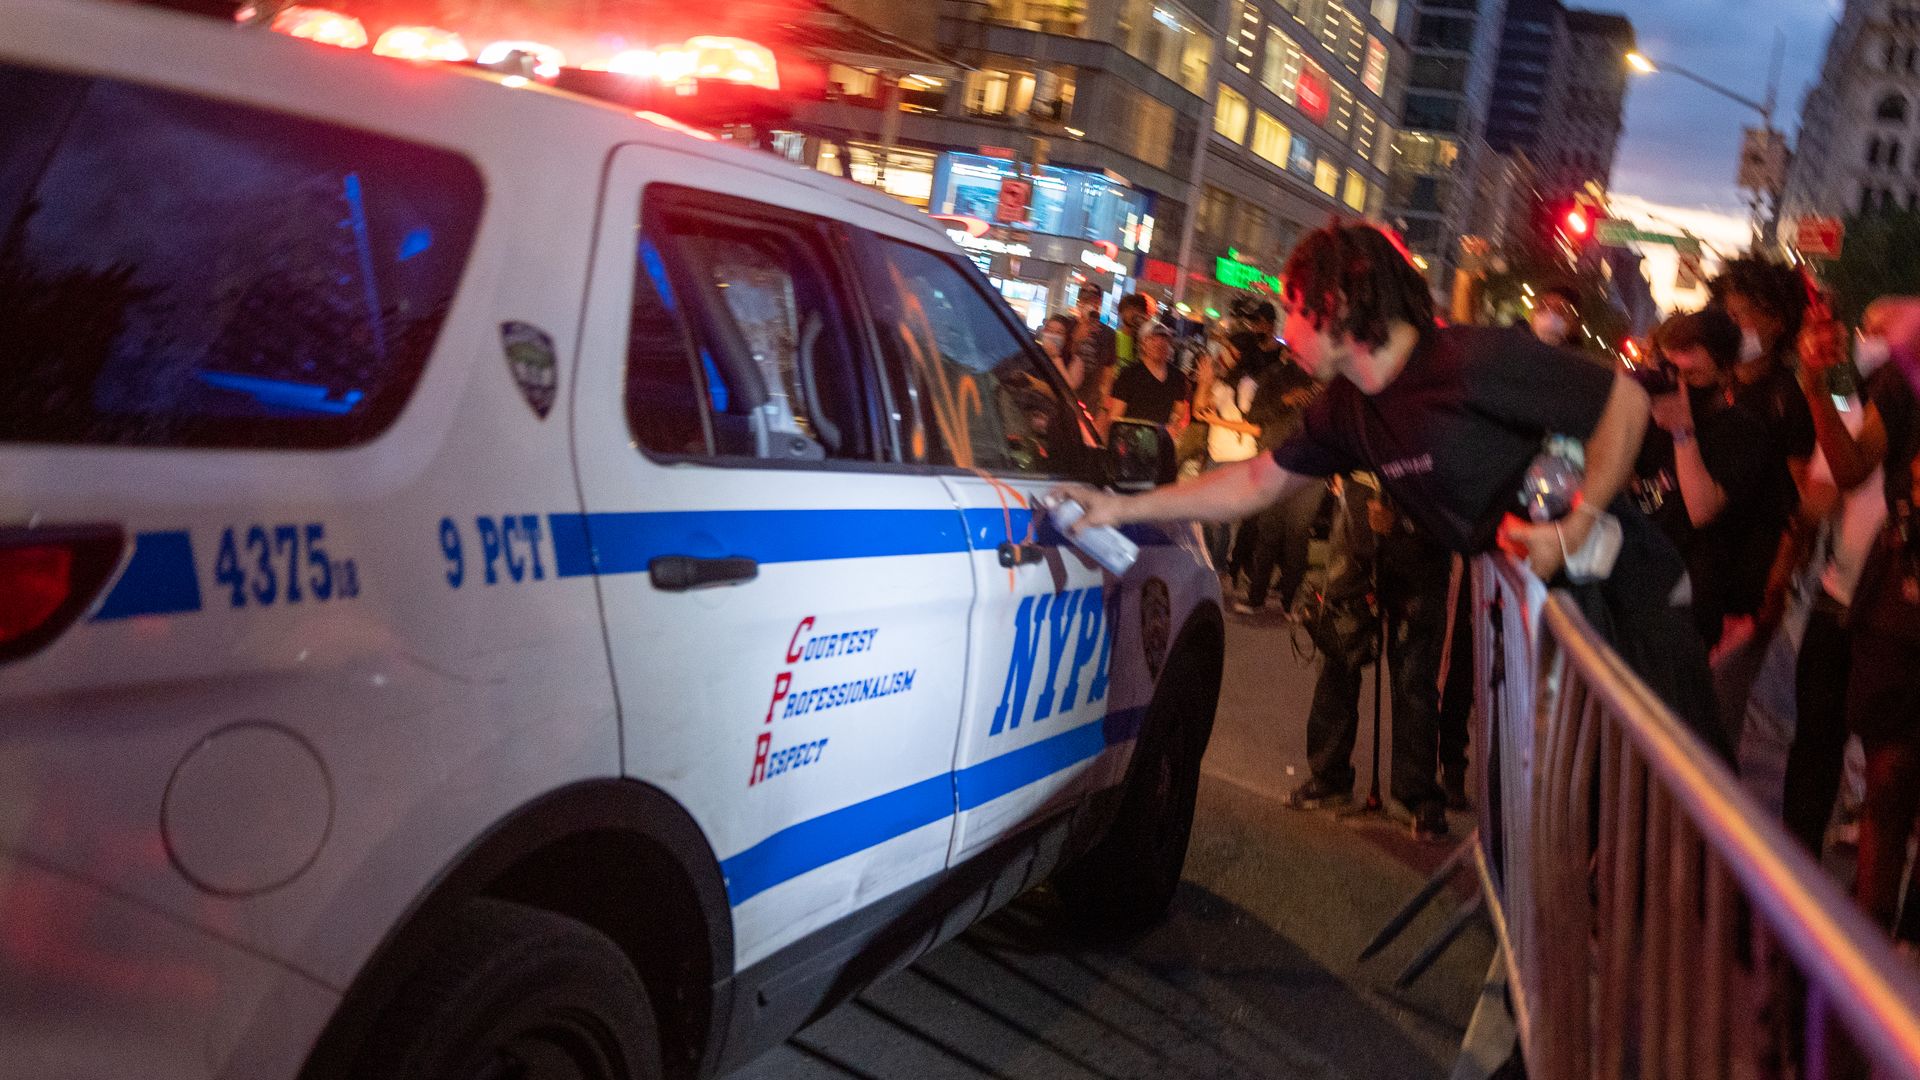 A protester tags a police car with spray paint in New York City